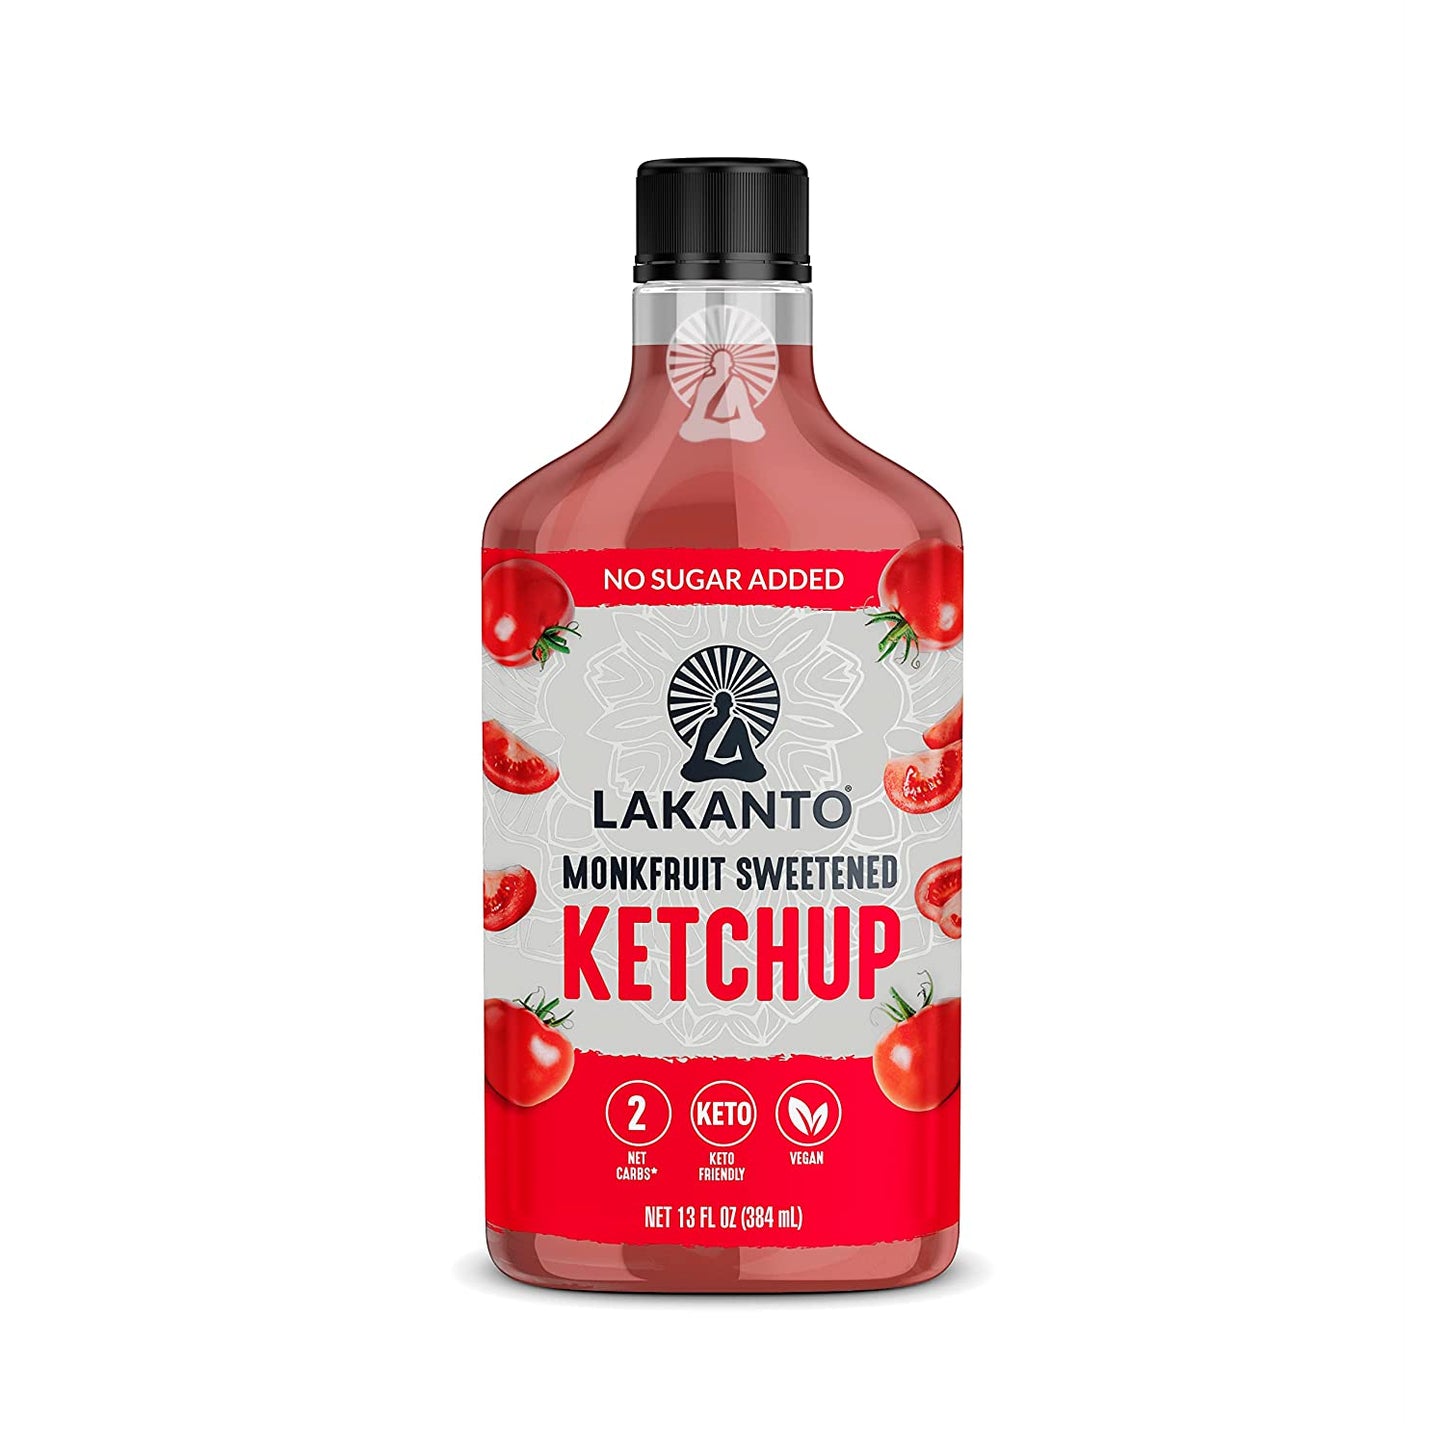 Ketchup - Monk Fruit Sweetened, No Sugar Added 5.00% Off Auto renew